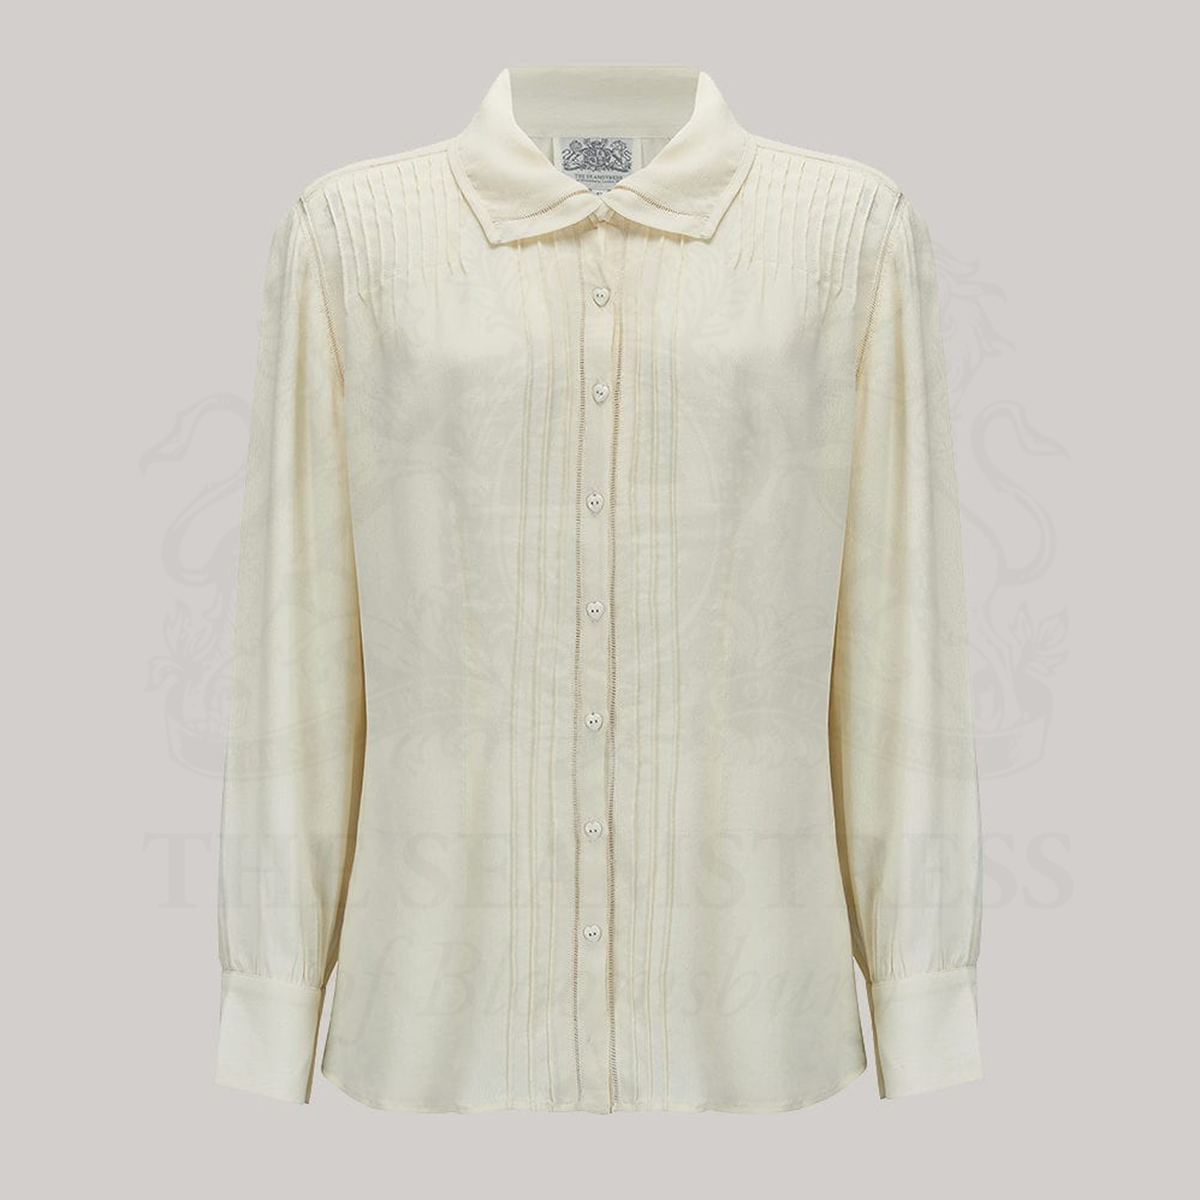 A 1940s style cream long sleeve blouse. Detailed pin tuck stitching down the front and back of the blouse, heart shaped buttons, and long sleeves with deep cuffs. Blouse has a cutaway collar with more pin tuck stitching. 